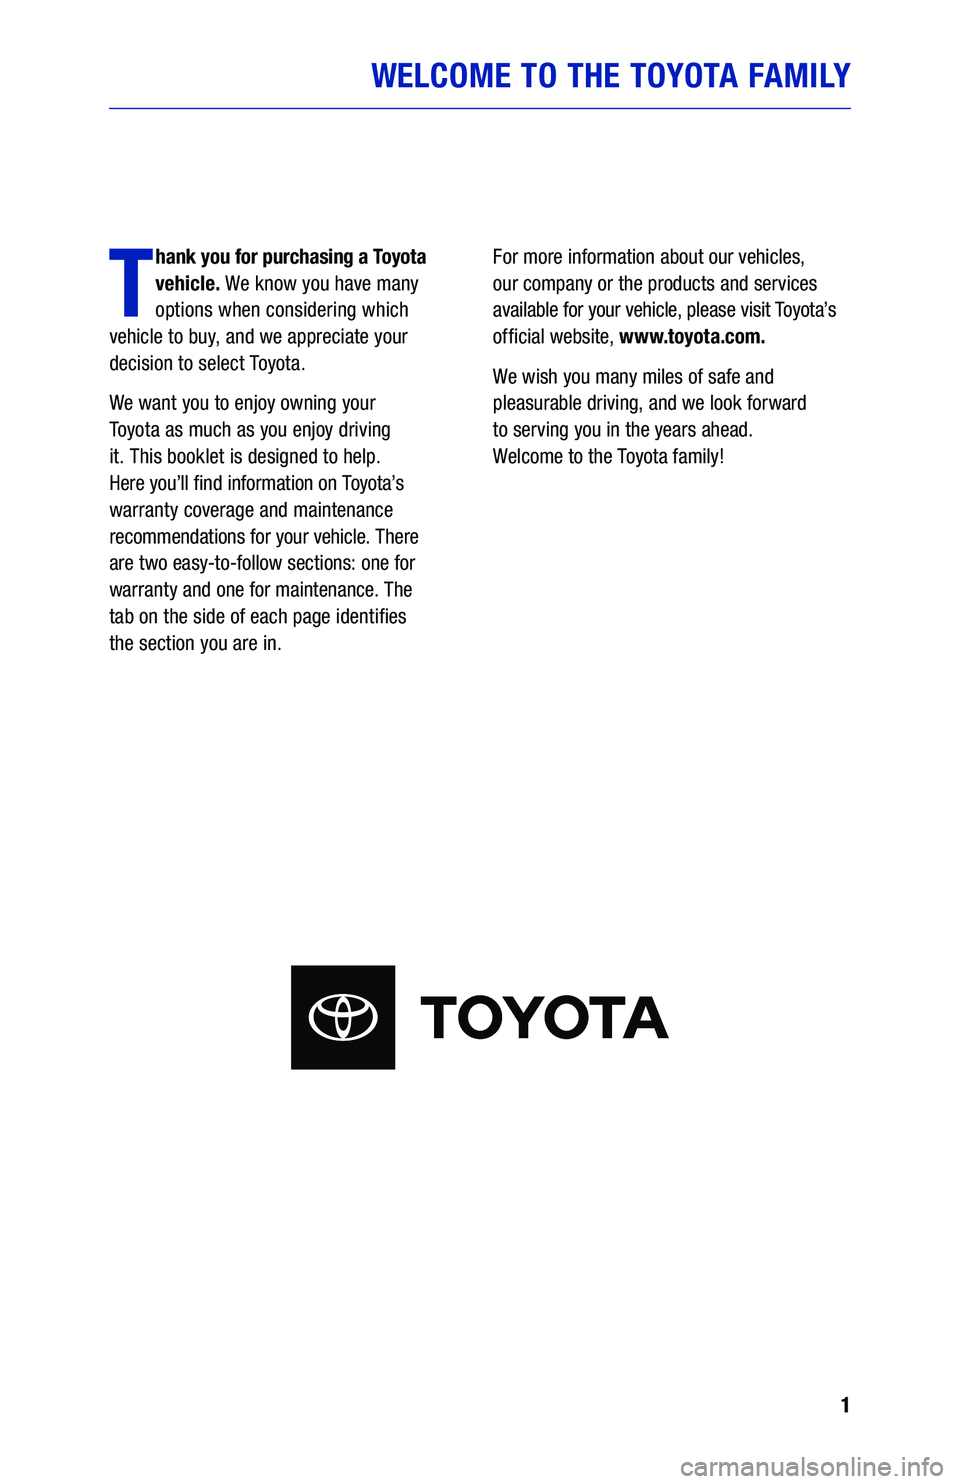 TOYOTA SIENNA HYBRID 2021  Warranties & Maintenance Guides (in English) 1
WELCOME TO THE TOYOTA FAMILY
T
hank you for purchasing a Toyota 
vehicle. We know you have many 
options when considering which  
vehicle to buy, and we appreciate your 
decision to select Toyota.
W